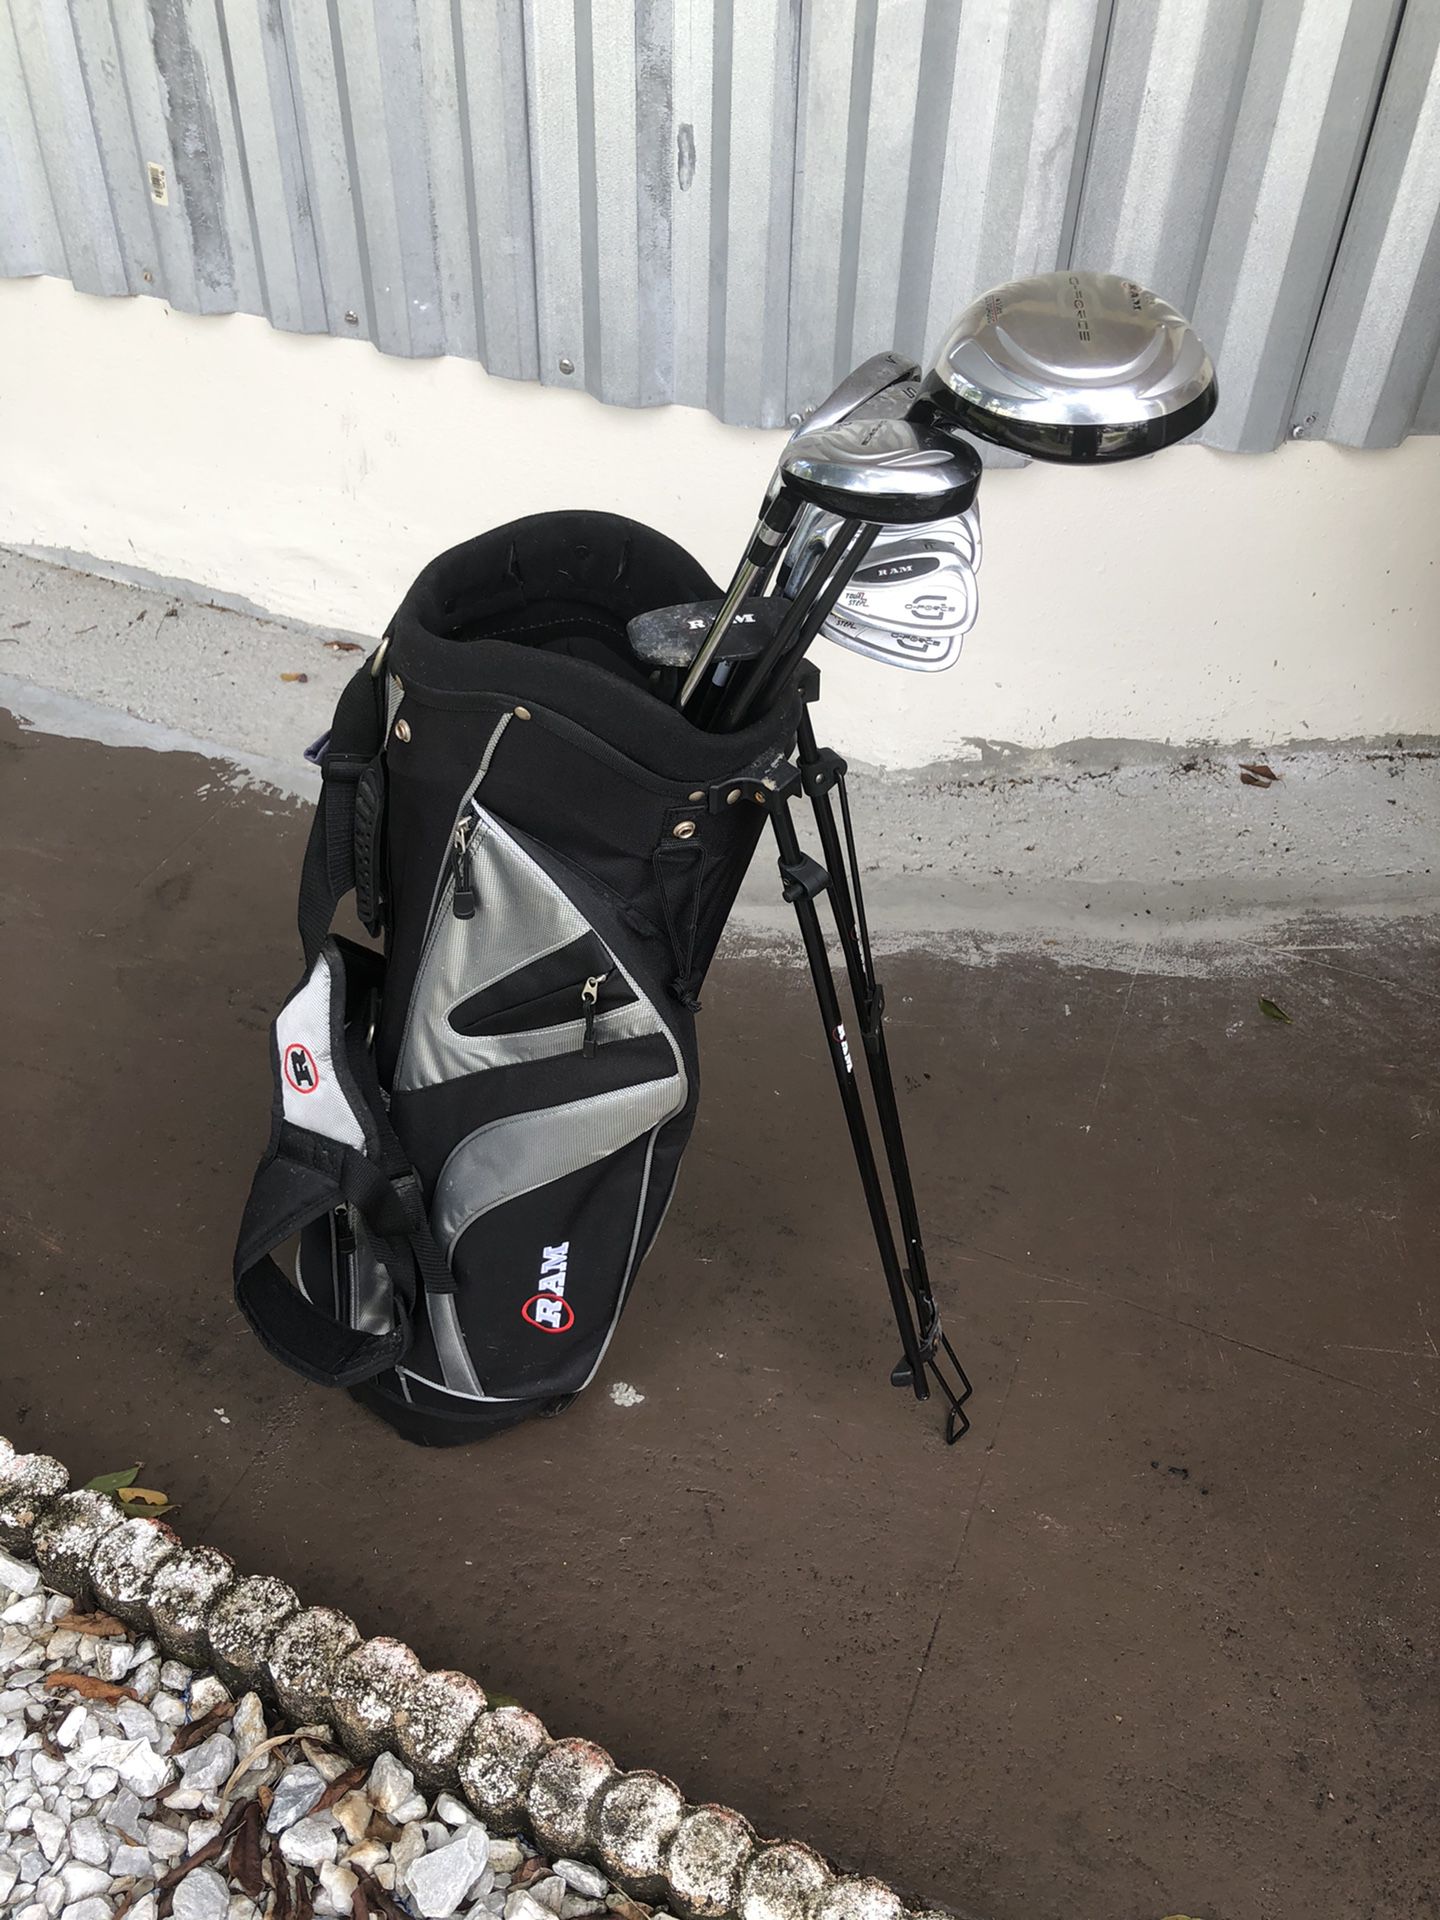 RAM GOLF CLUBS HAVE BEEN USED BUT STILL IN GREAT SHAPE